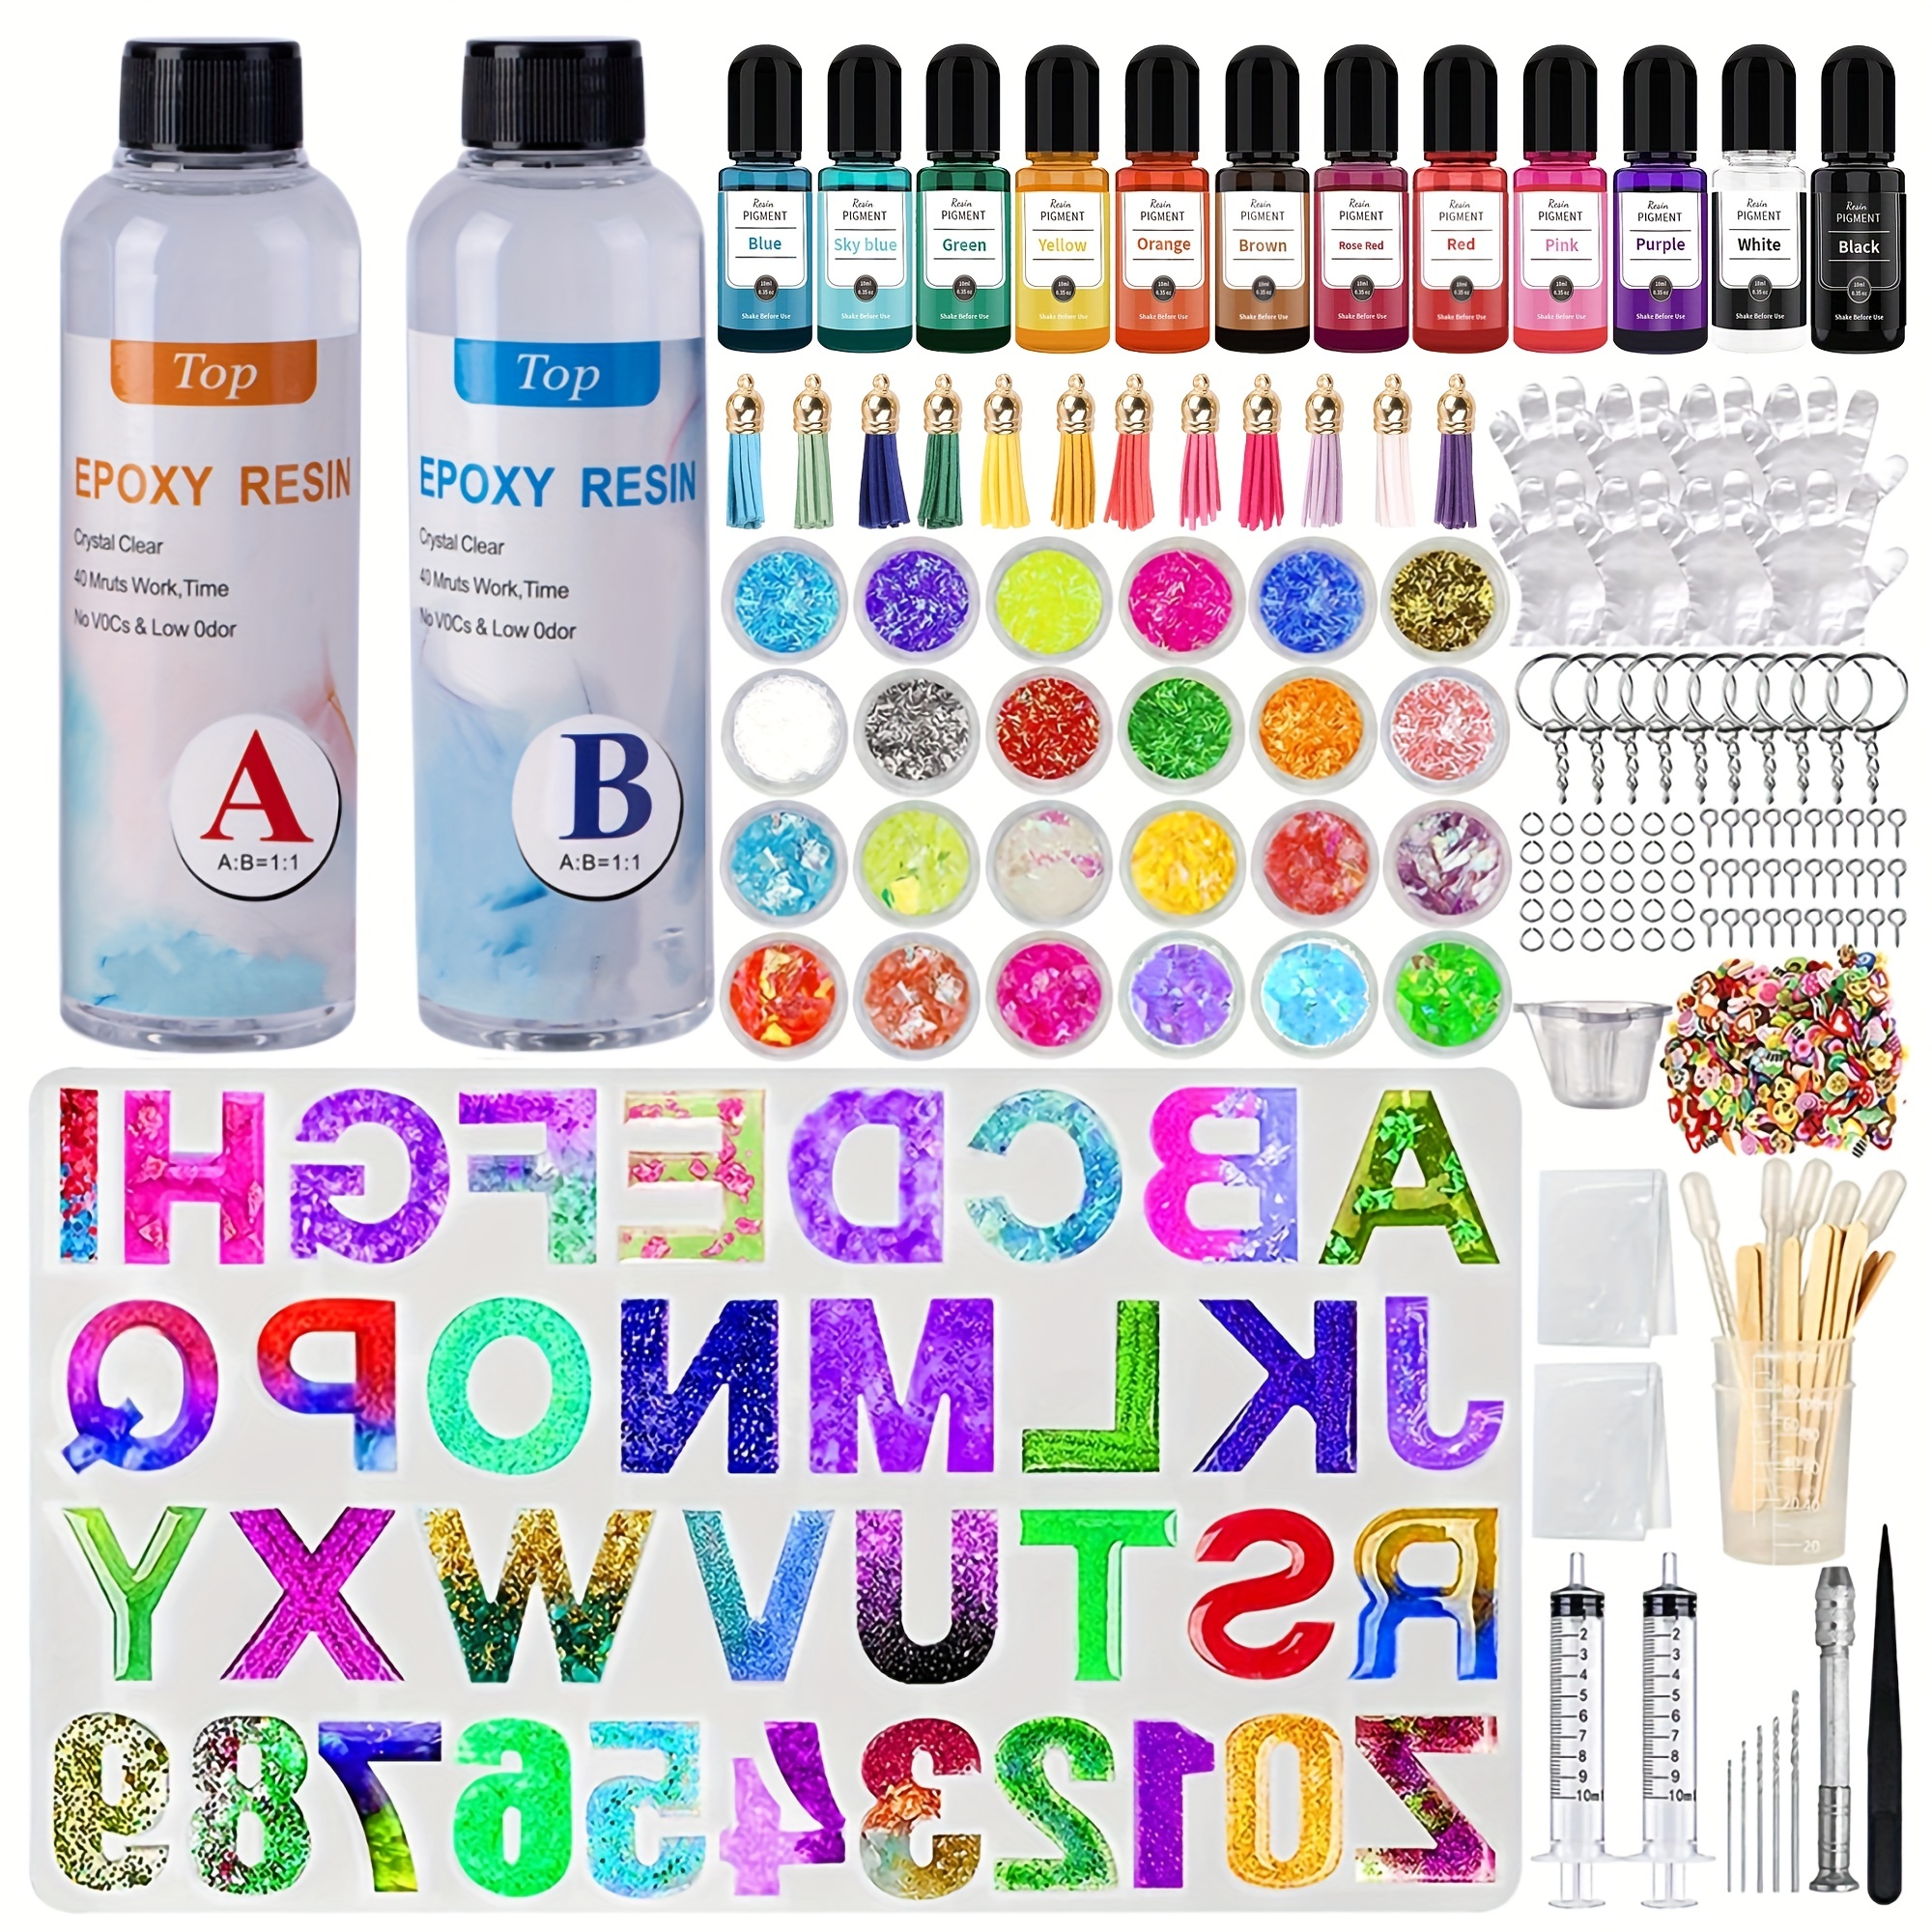 

Resin Alphabet Mold Starter Kit 168 Pcs Letter Silicone Keychain Molds Reversed Backward Number Molds With Epoxy Resin Mold Pigments Tools For Epoxy Resin Beginners Adults Jewelry Earring Pendant